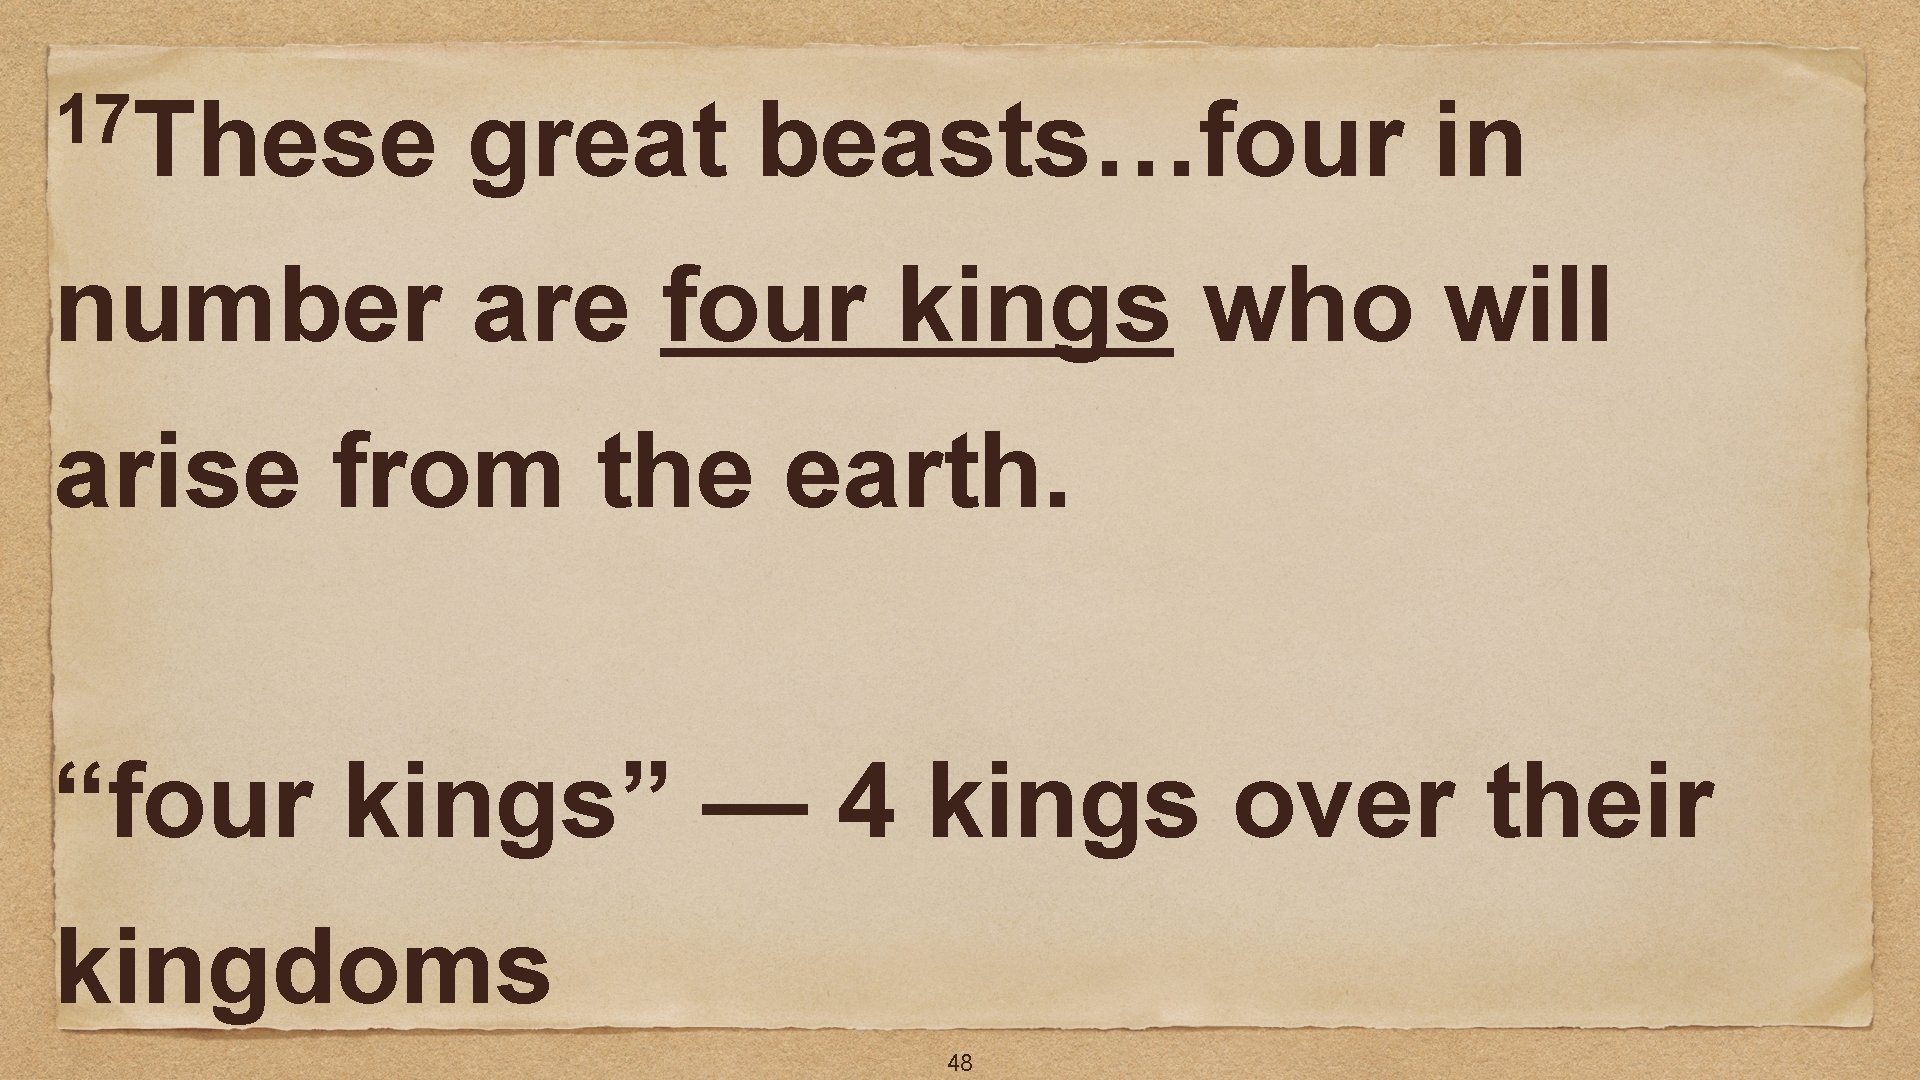 17 These great beasts…four in number are four kings who will arise from the